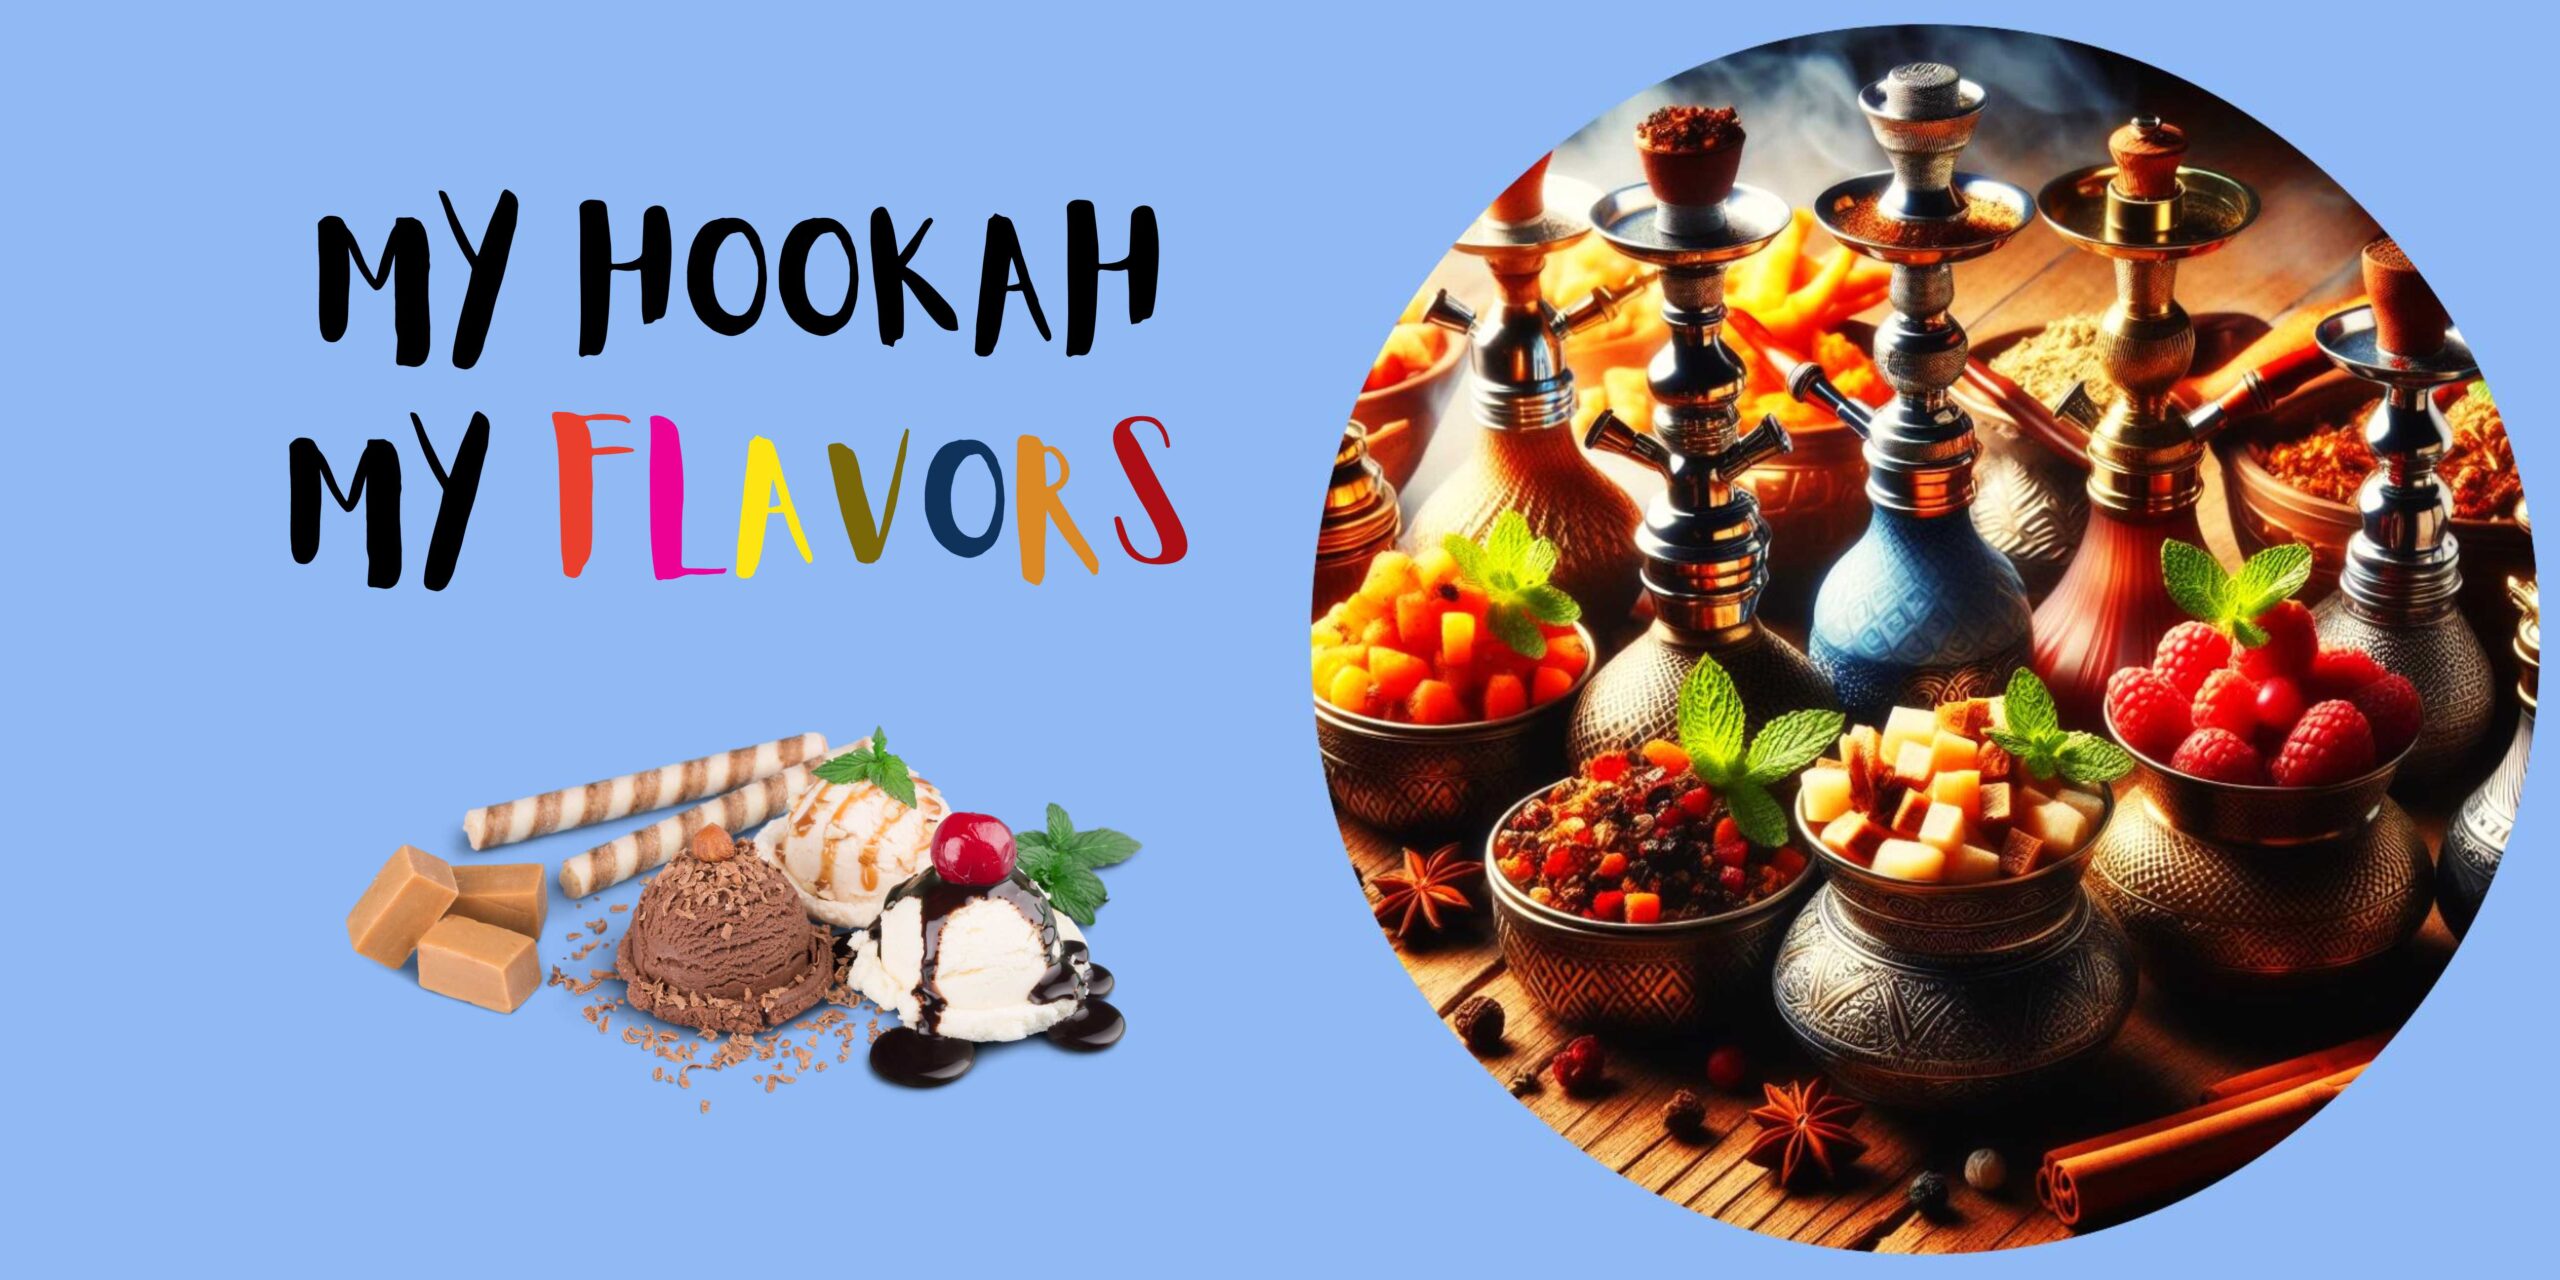 Image is about the delicious hookah flavors showing colorful fruits and mouthwatering chocolate caramel ice cream.